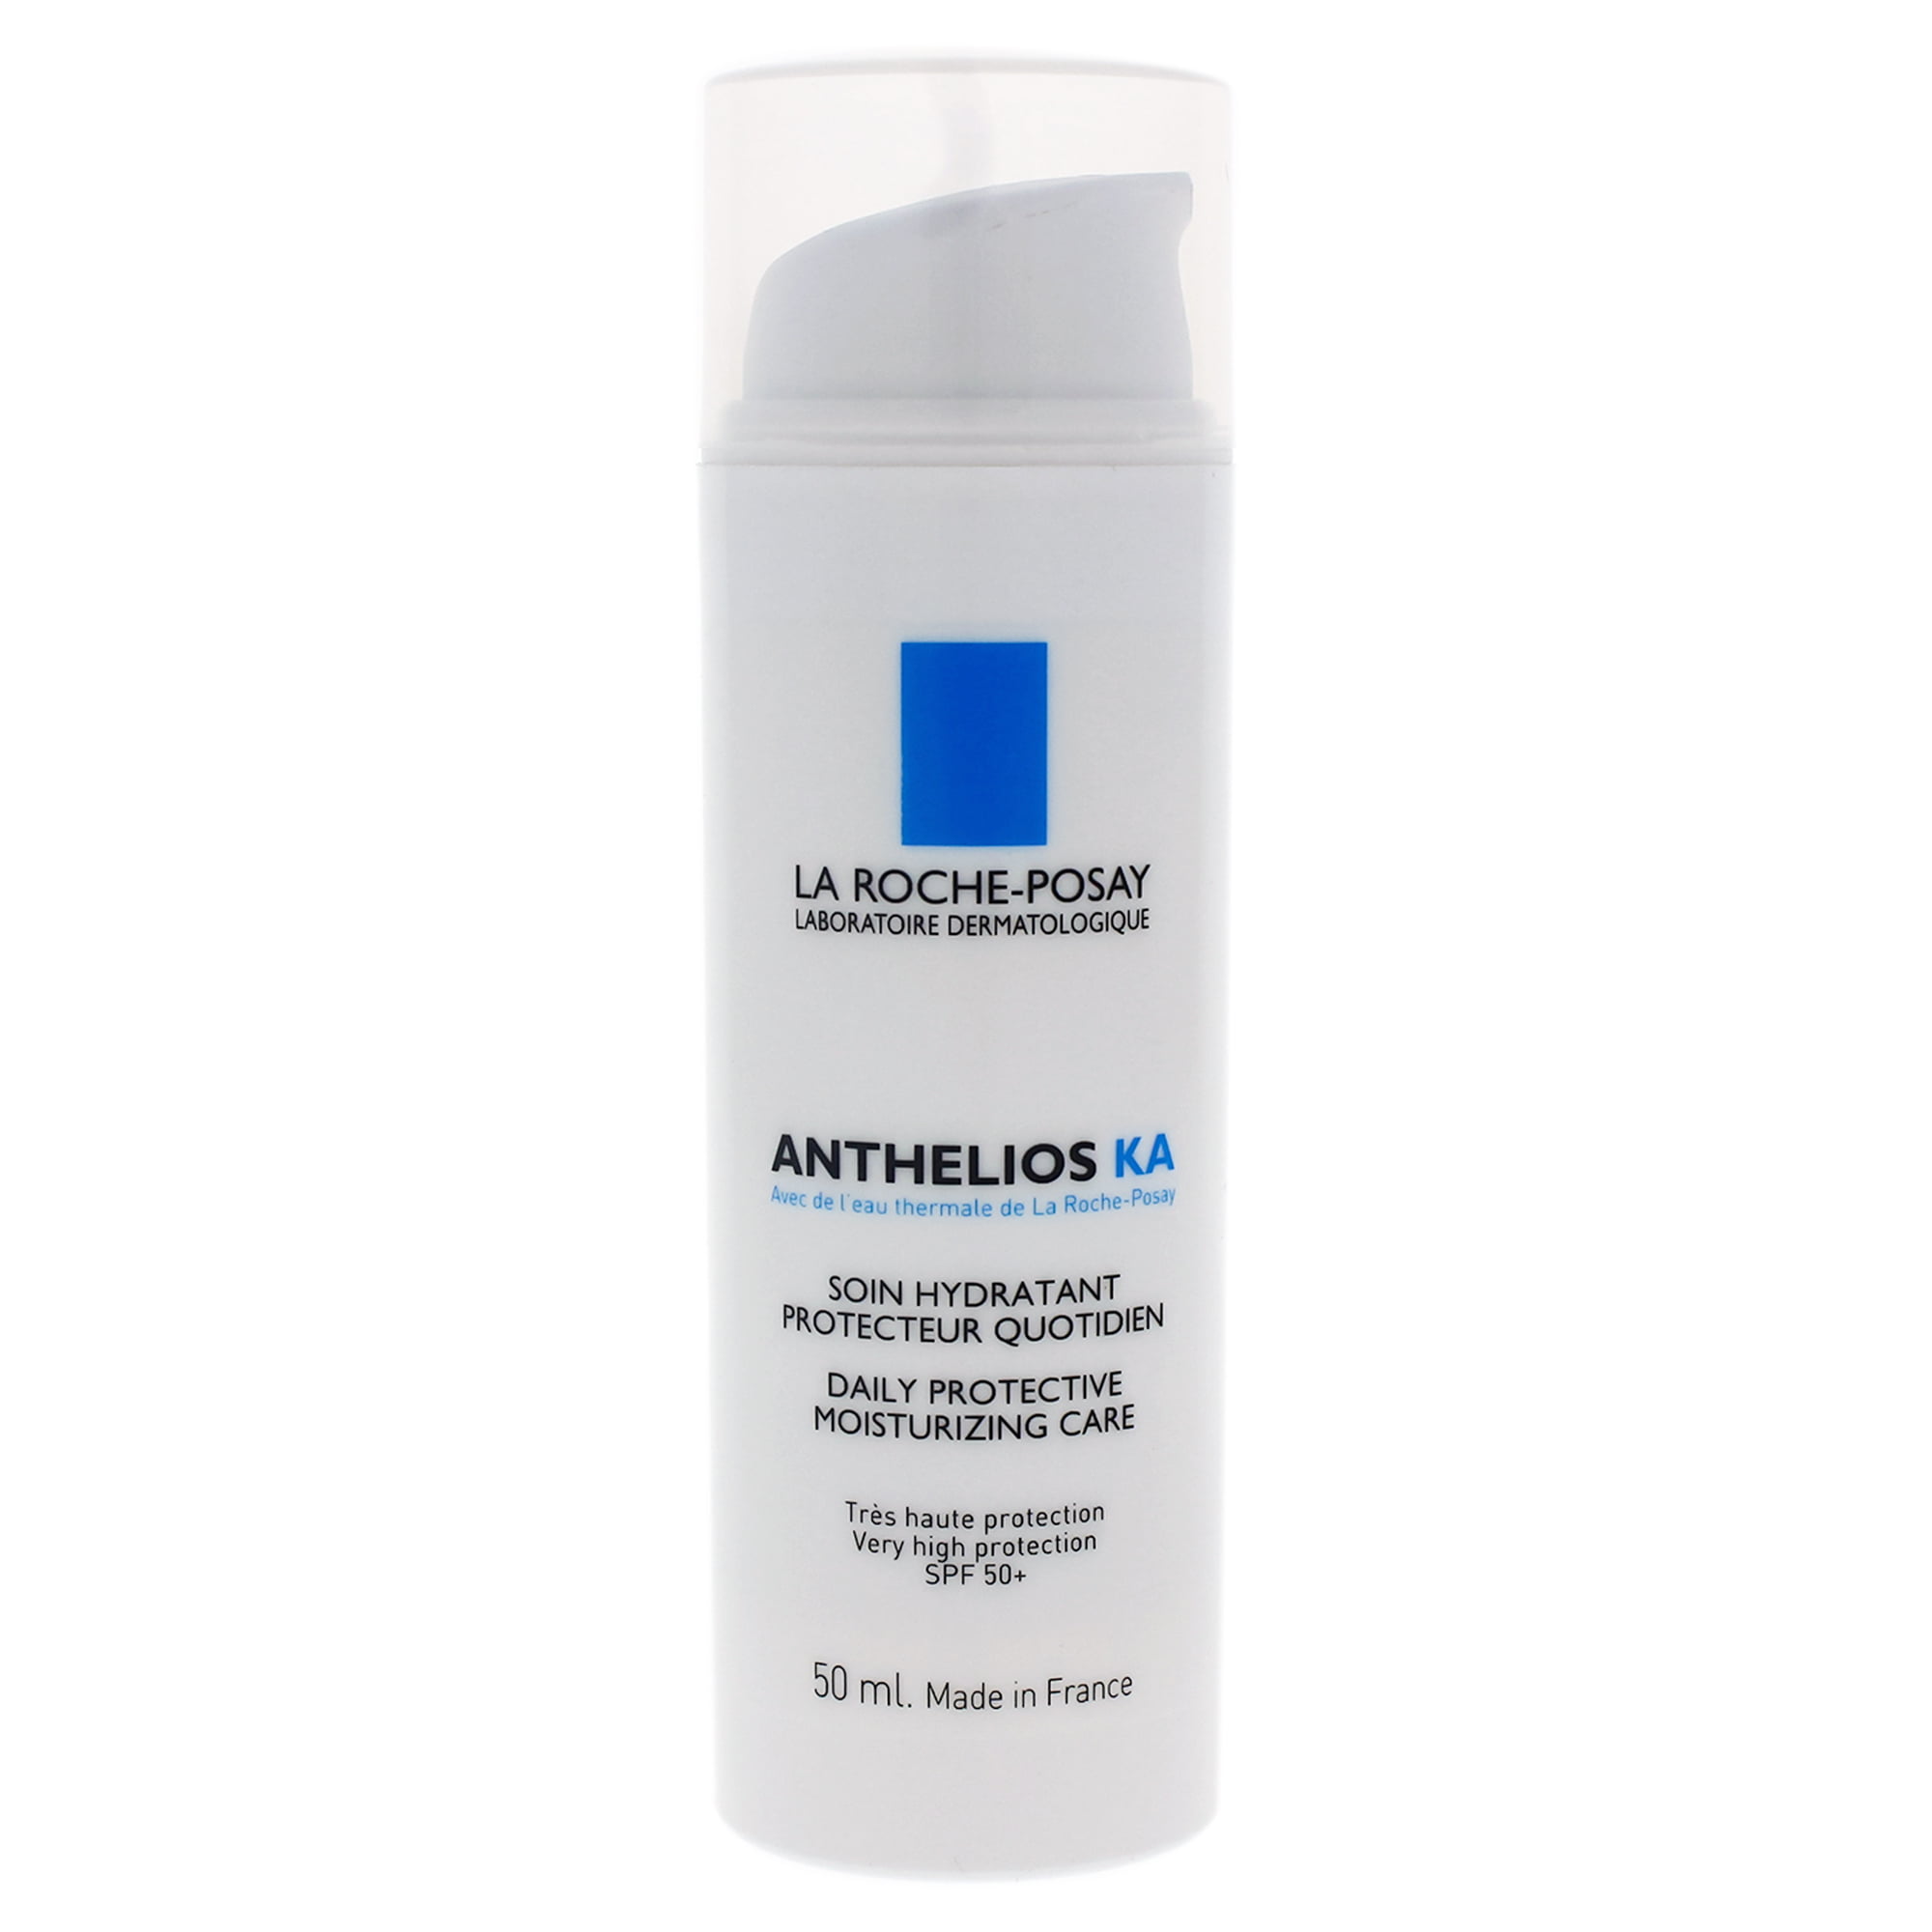 Anthelios KA Daily Care SPF 50 by La Roche-Posay for Unisex - oz Sunscreen -